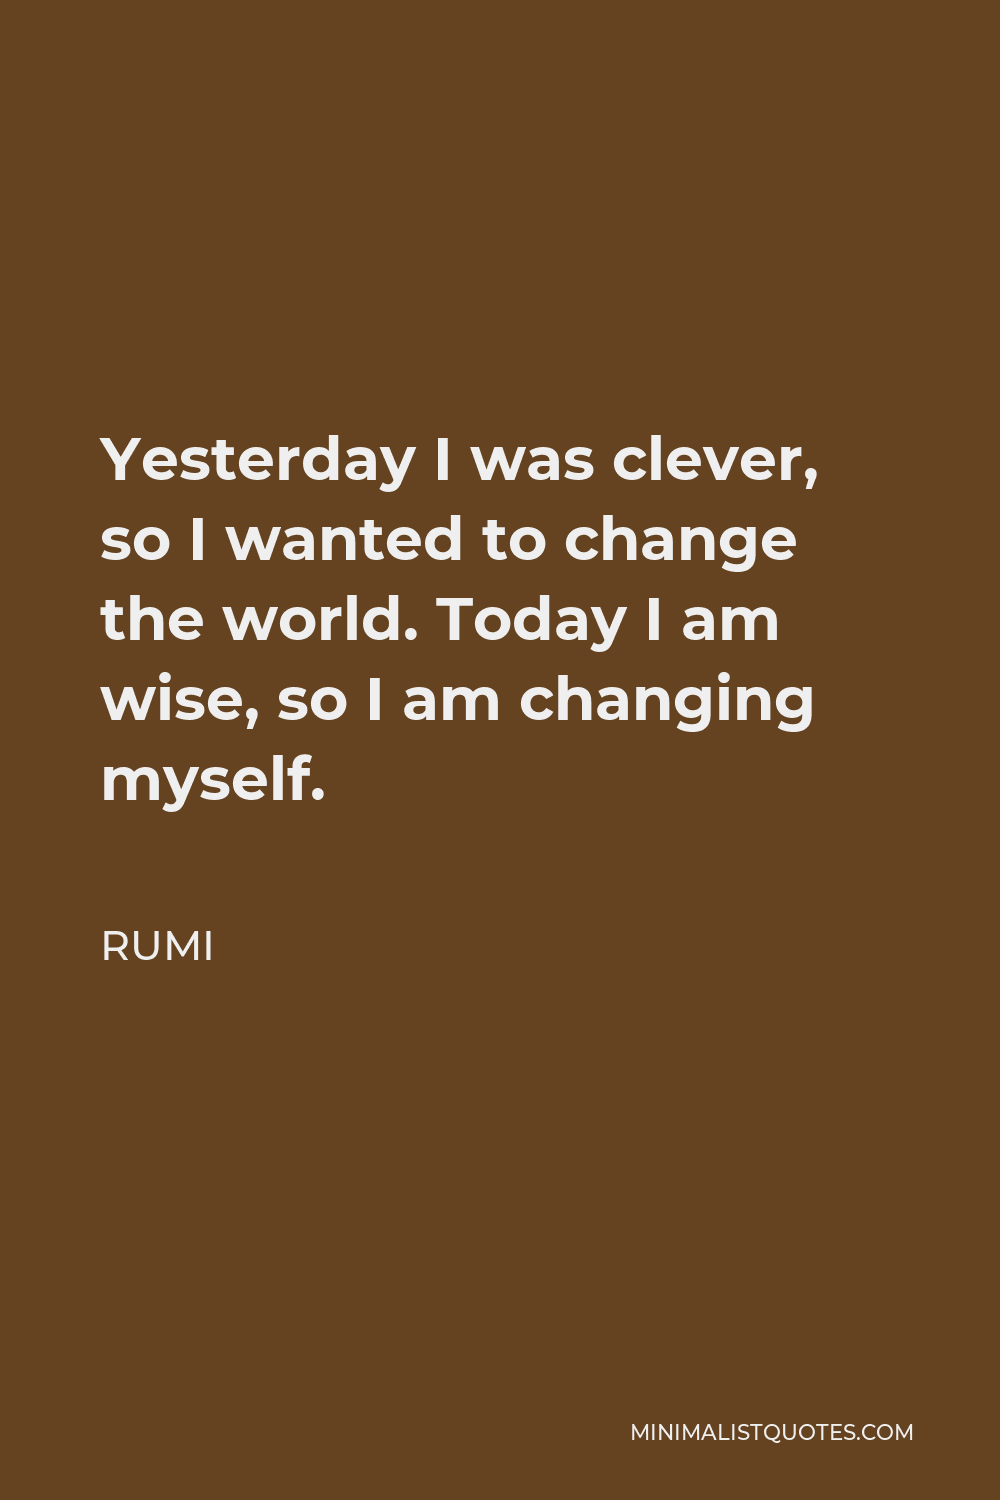 Rumi Quote - Yesterday I was clever, so I wanted to change the world. Today I am wise, so I am changing myself.